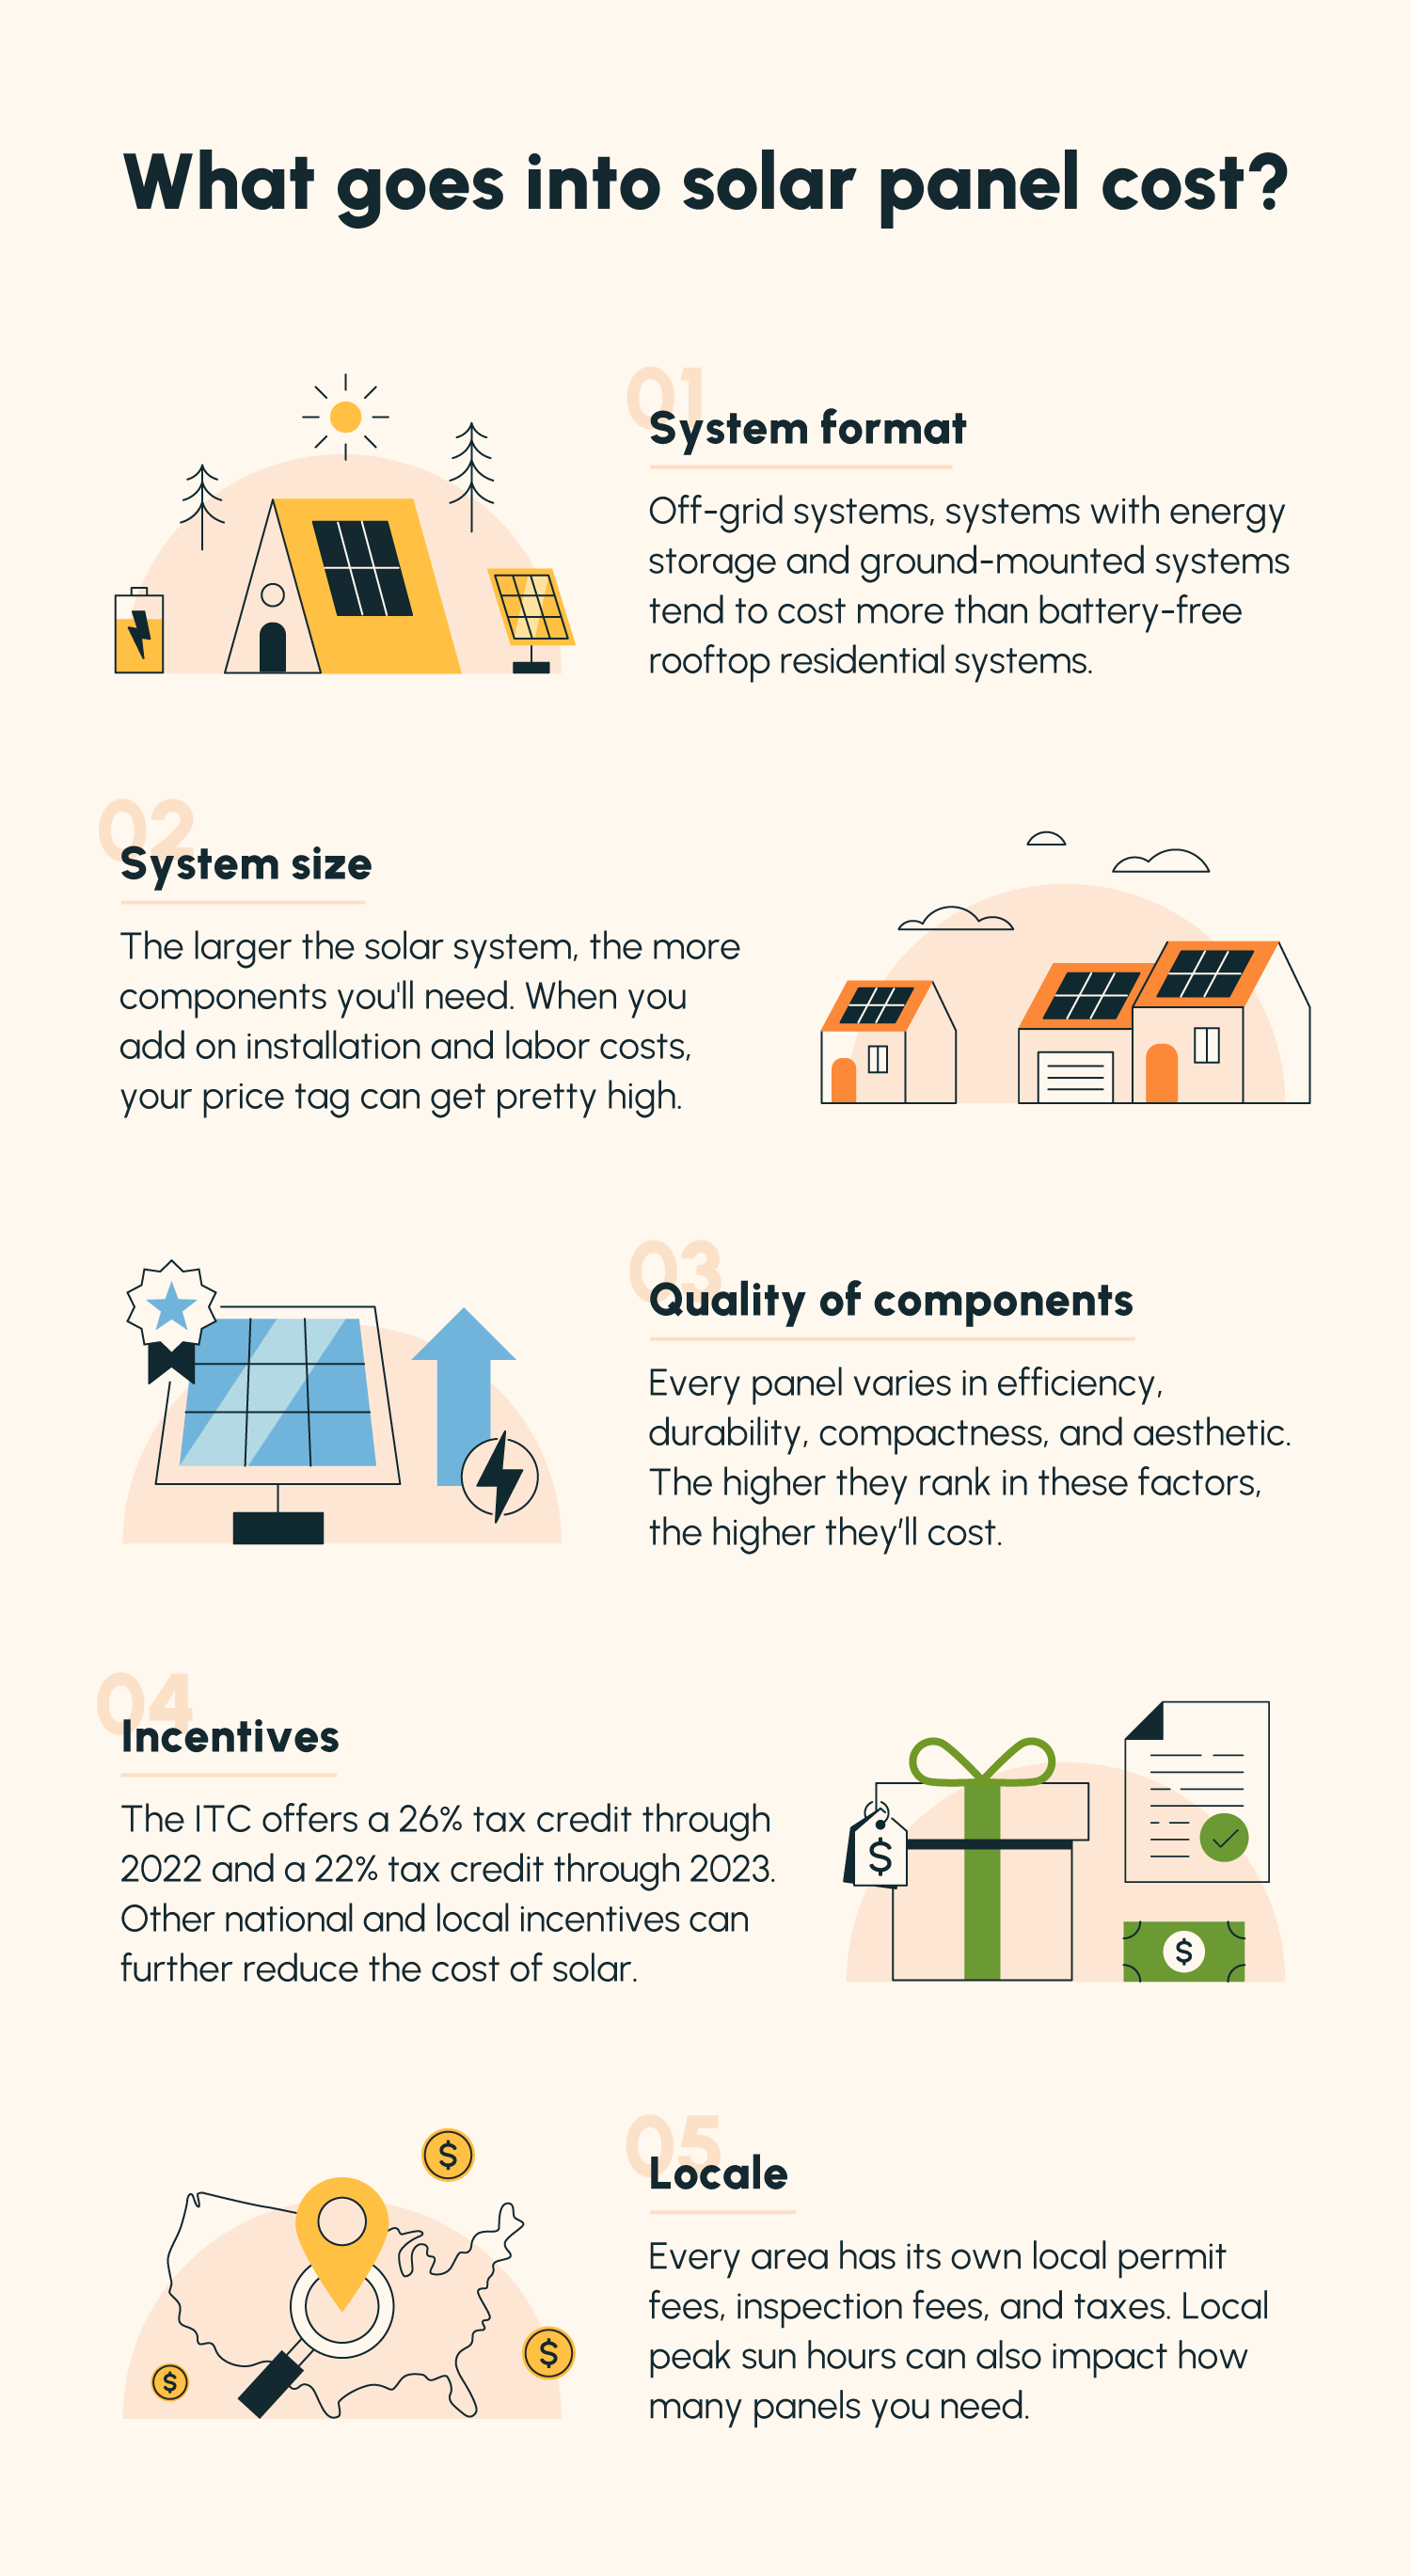 An illustrated list of factors that go into the cost of solar panels